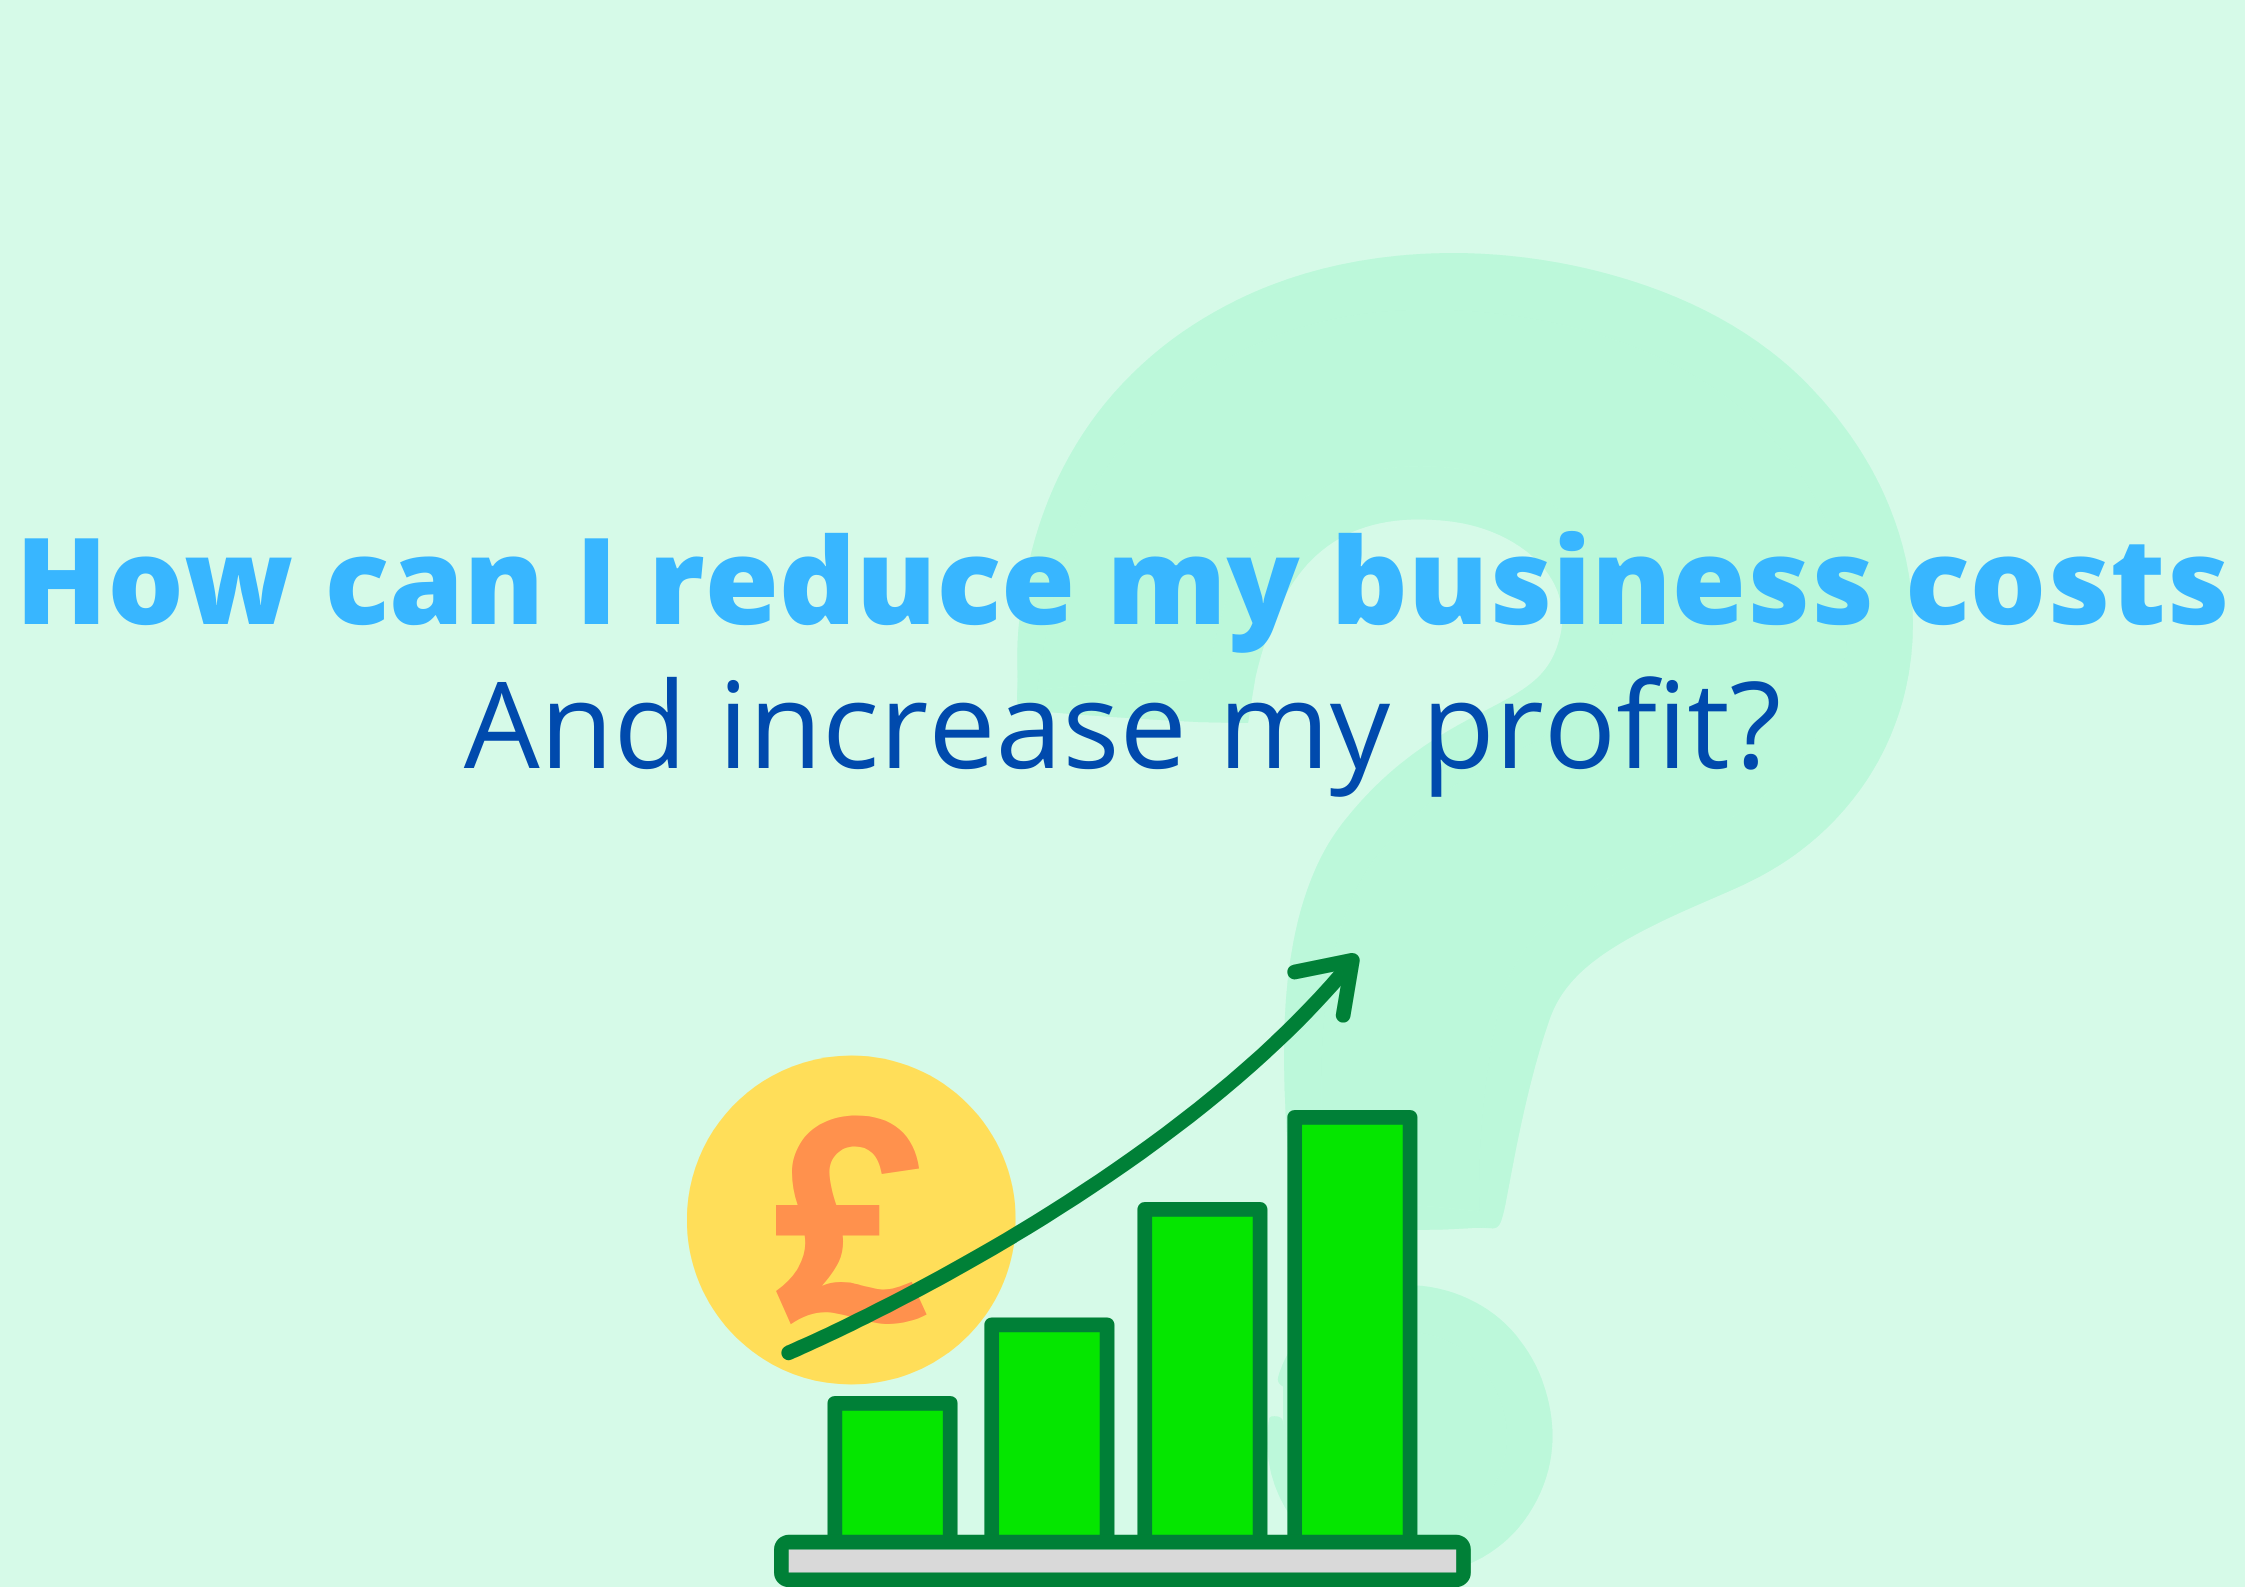 How can I reduce my business costs